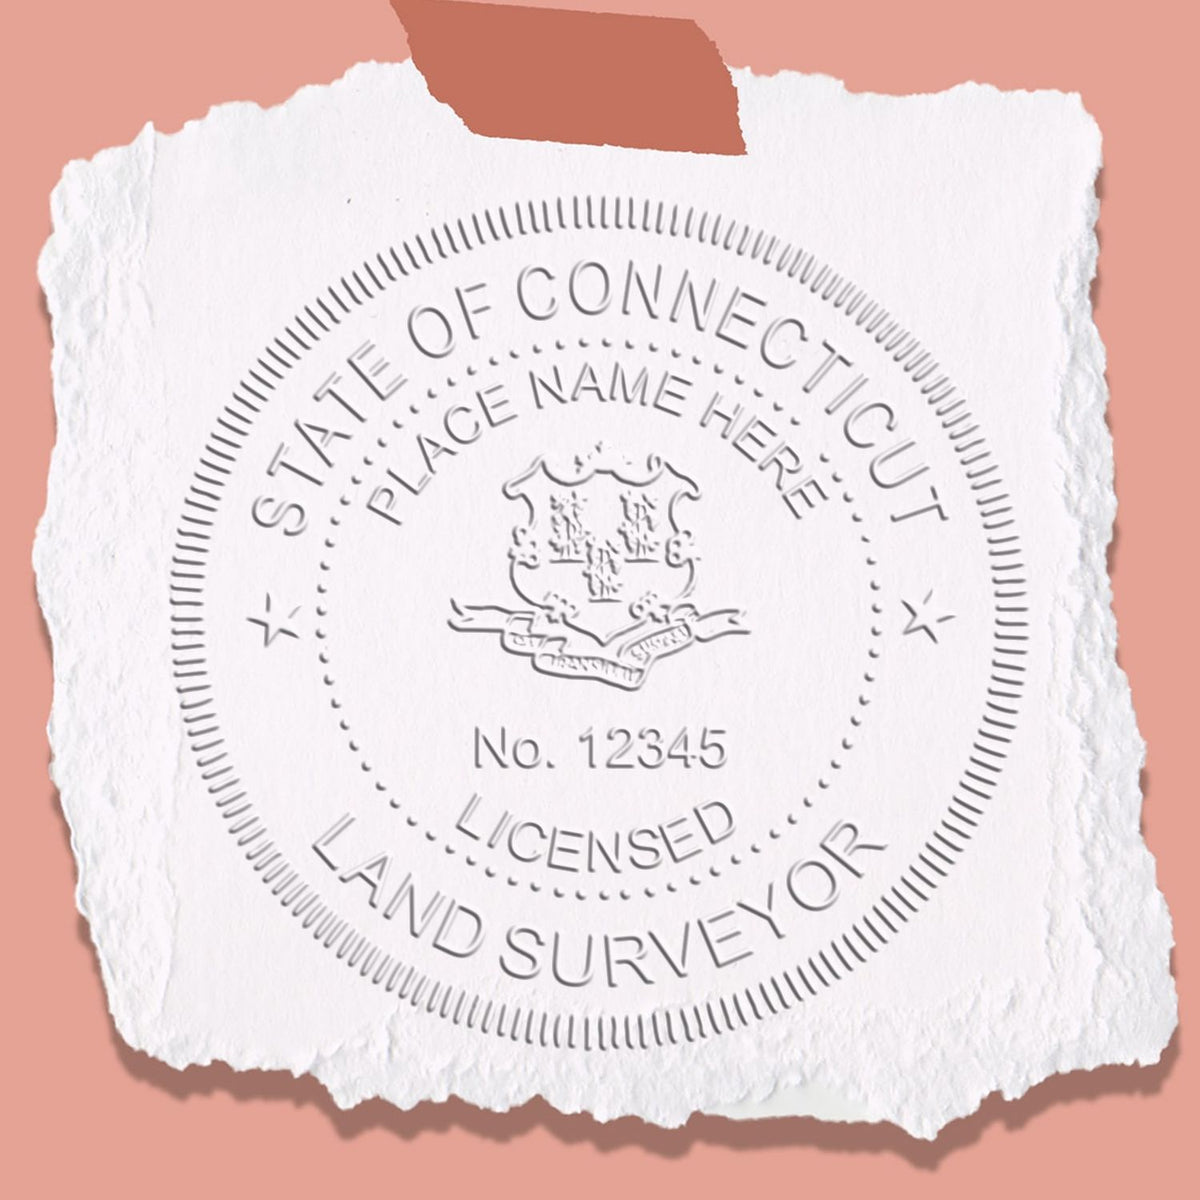 A photograph of the Hybrid Connecticut Land Surveyor Seal stamp impression reveals a vivid, professional image of the on paper.